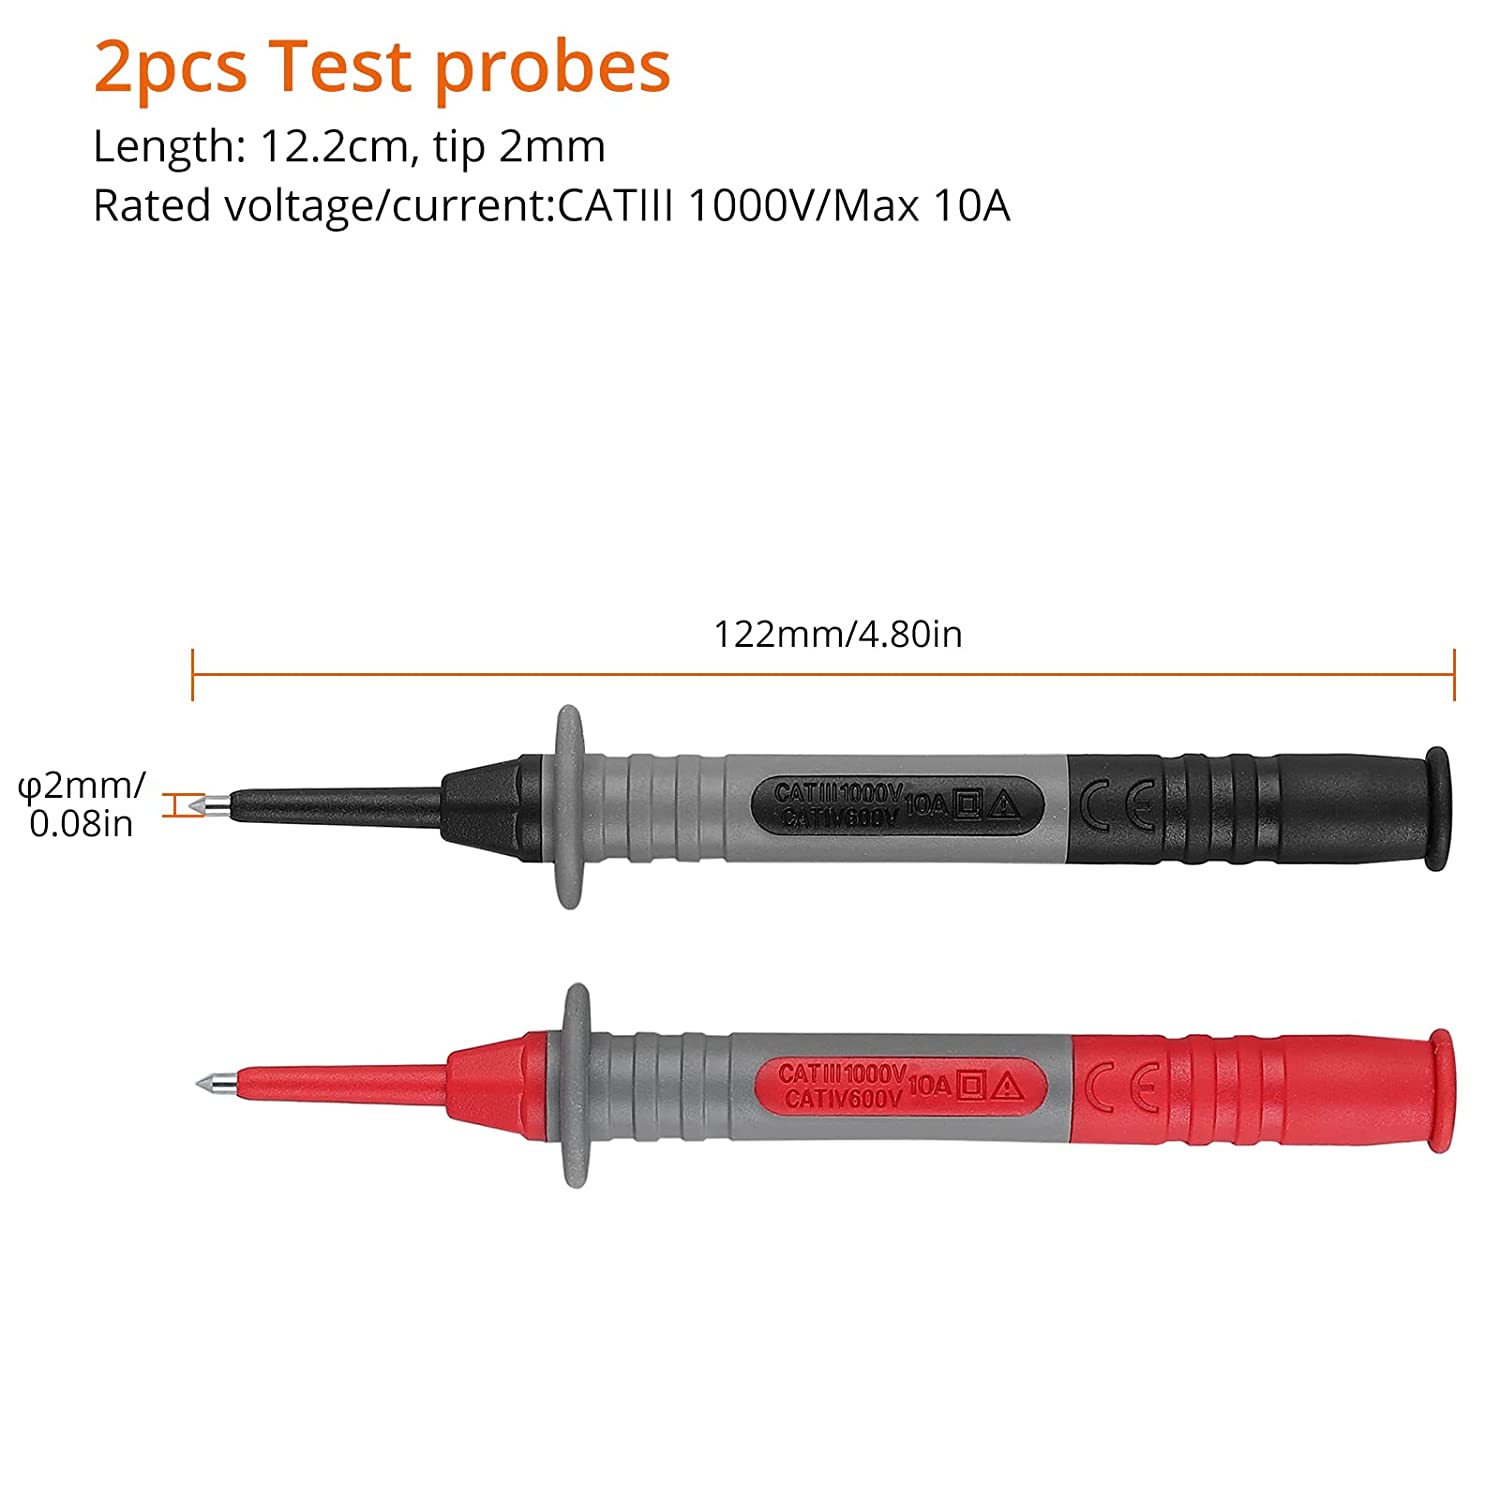 Proster Multimeter Test Leads Set with Alligator Clips Test Hook Test Probes Lead Professional Electrical Test Leads with Storage Pouch